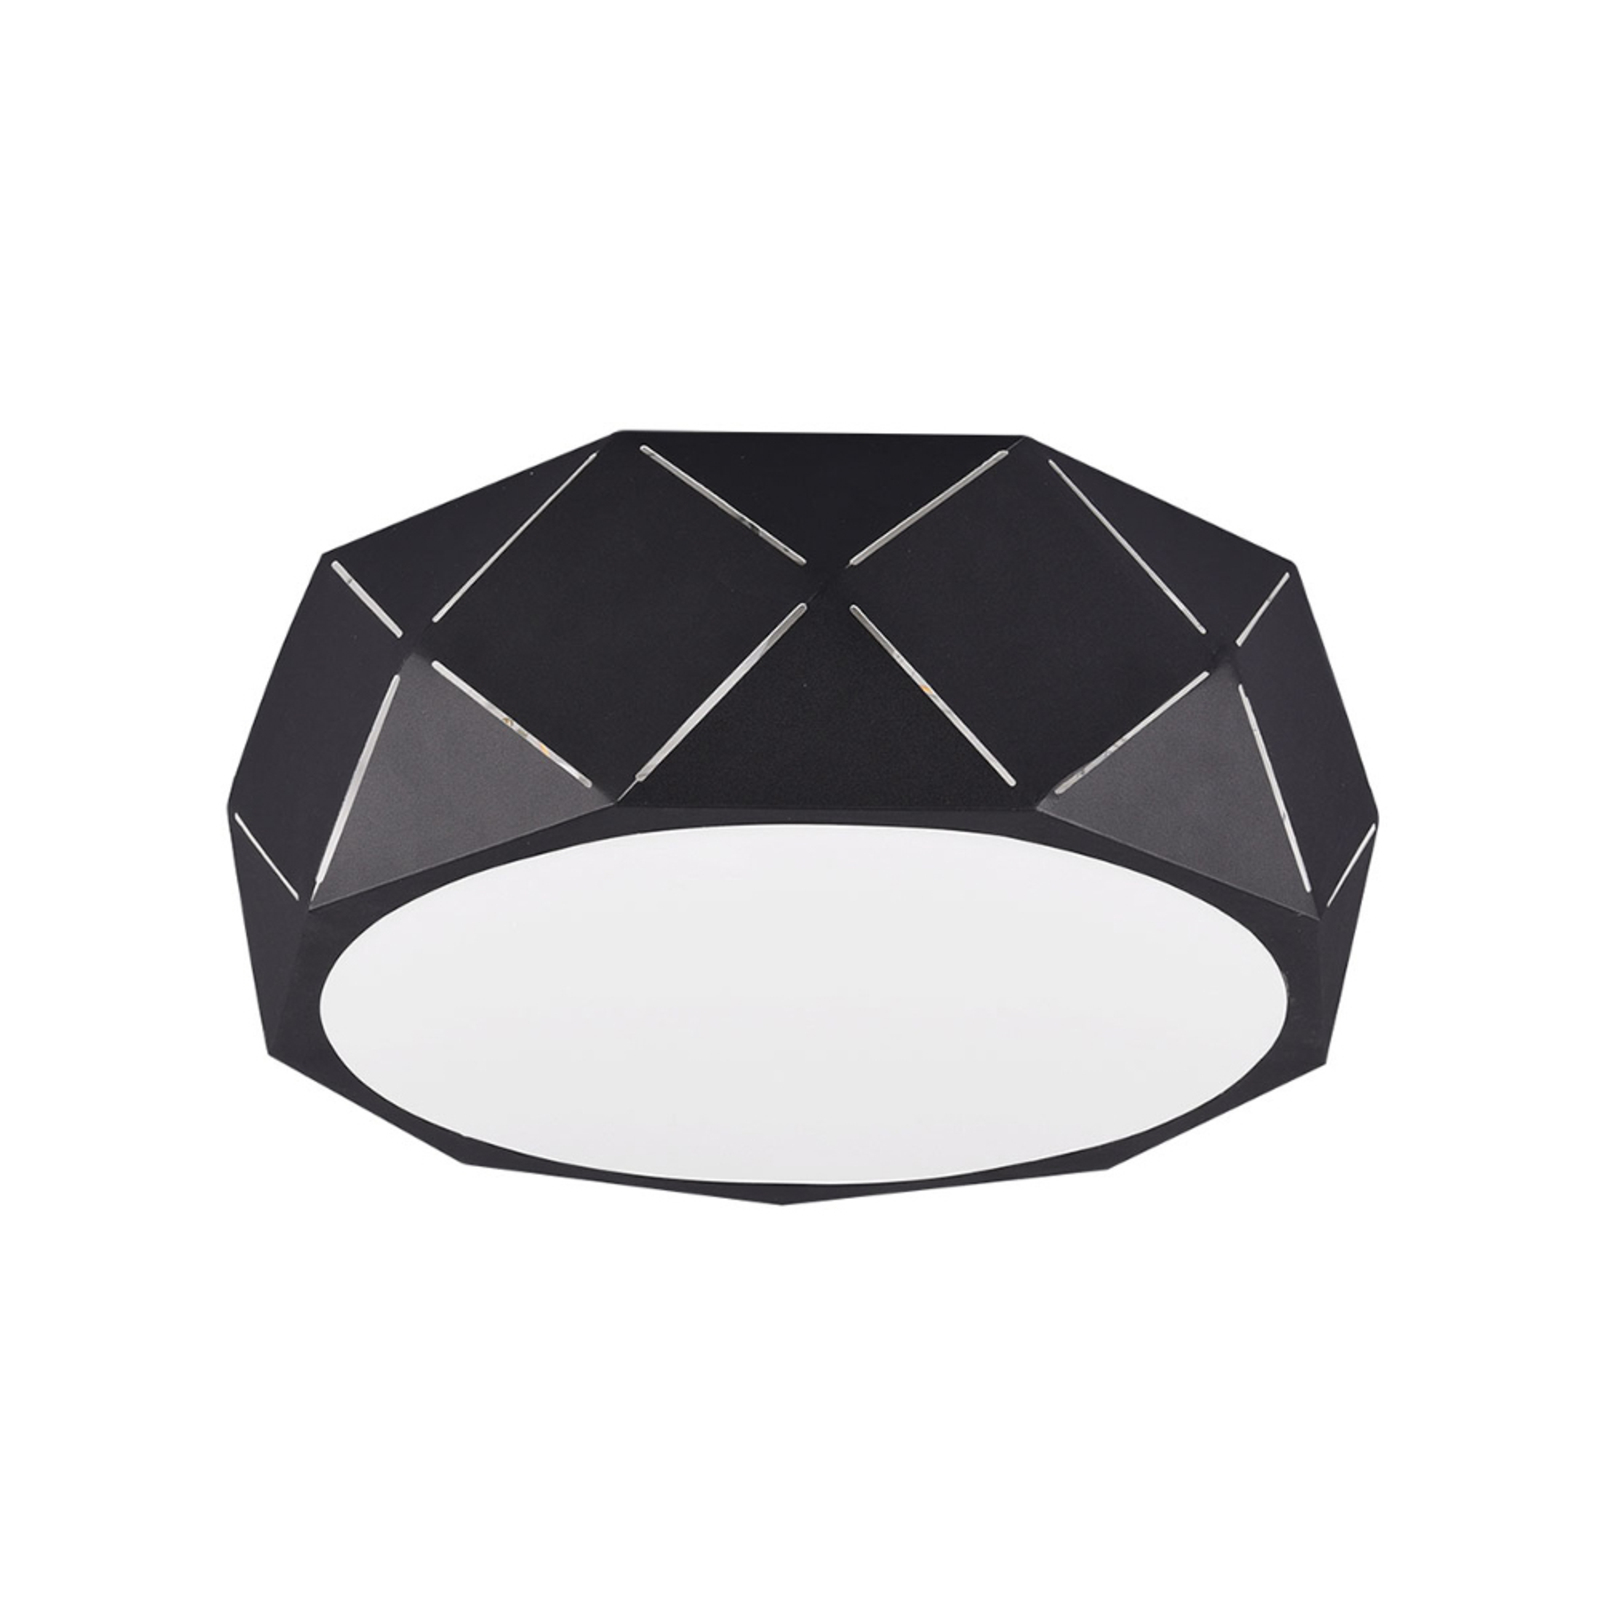 Zandor ceiling lamp with a black lampshade